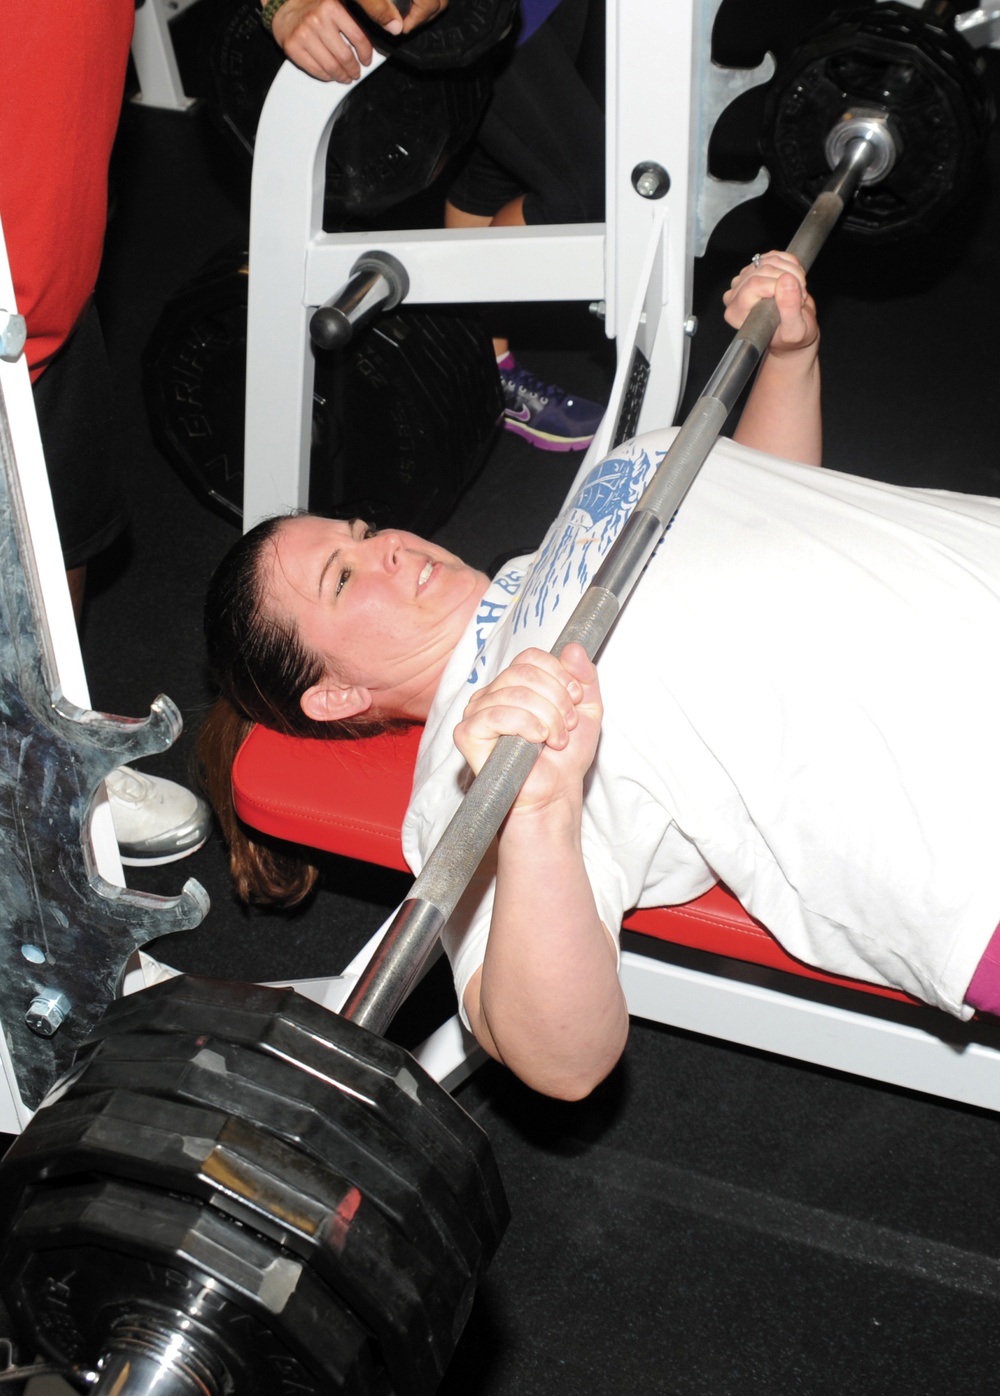 Marine Corps Logistics Base Albany hosts 2013 Bench Press Competition